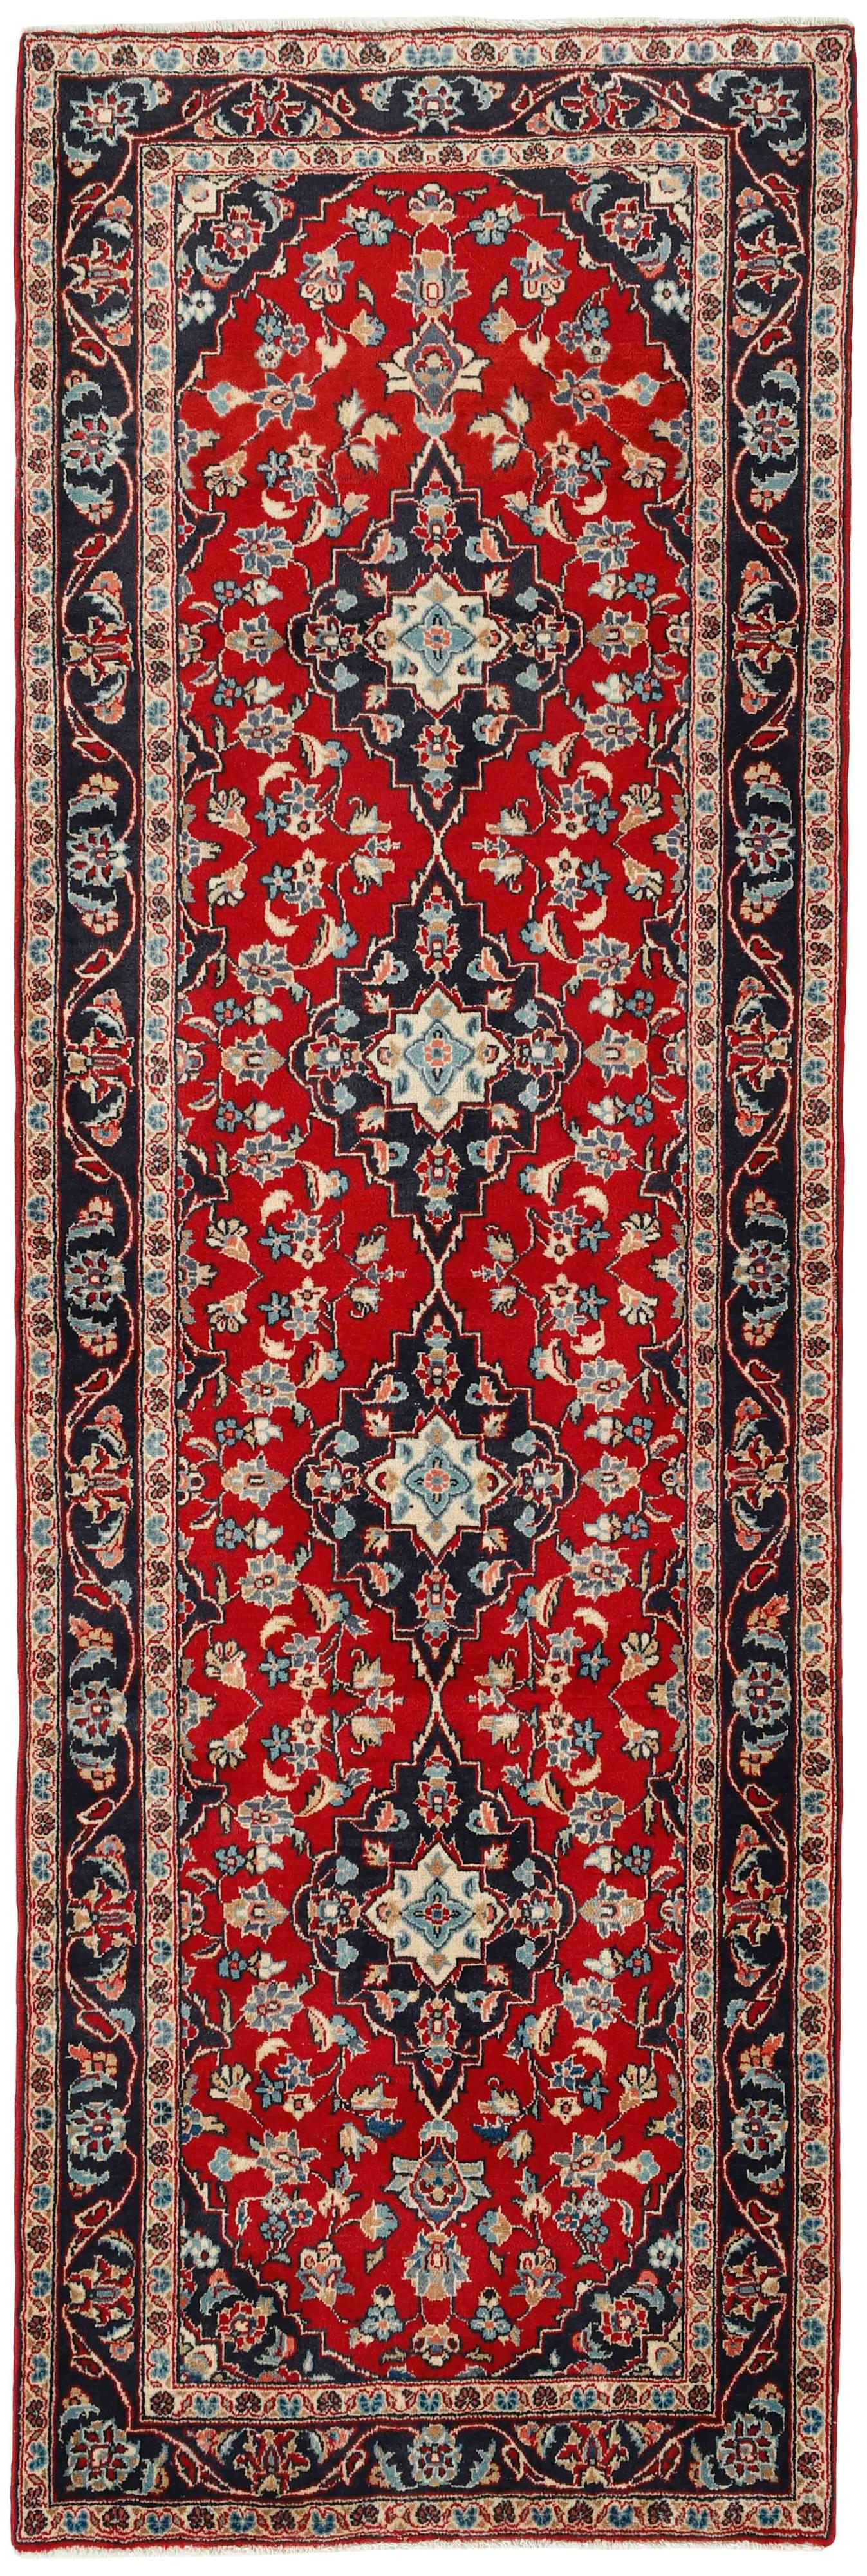 Authentic persian runner with Traditionalfloral design in red and blue